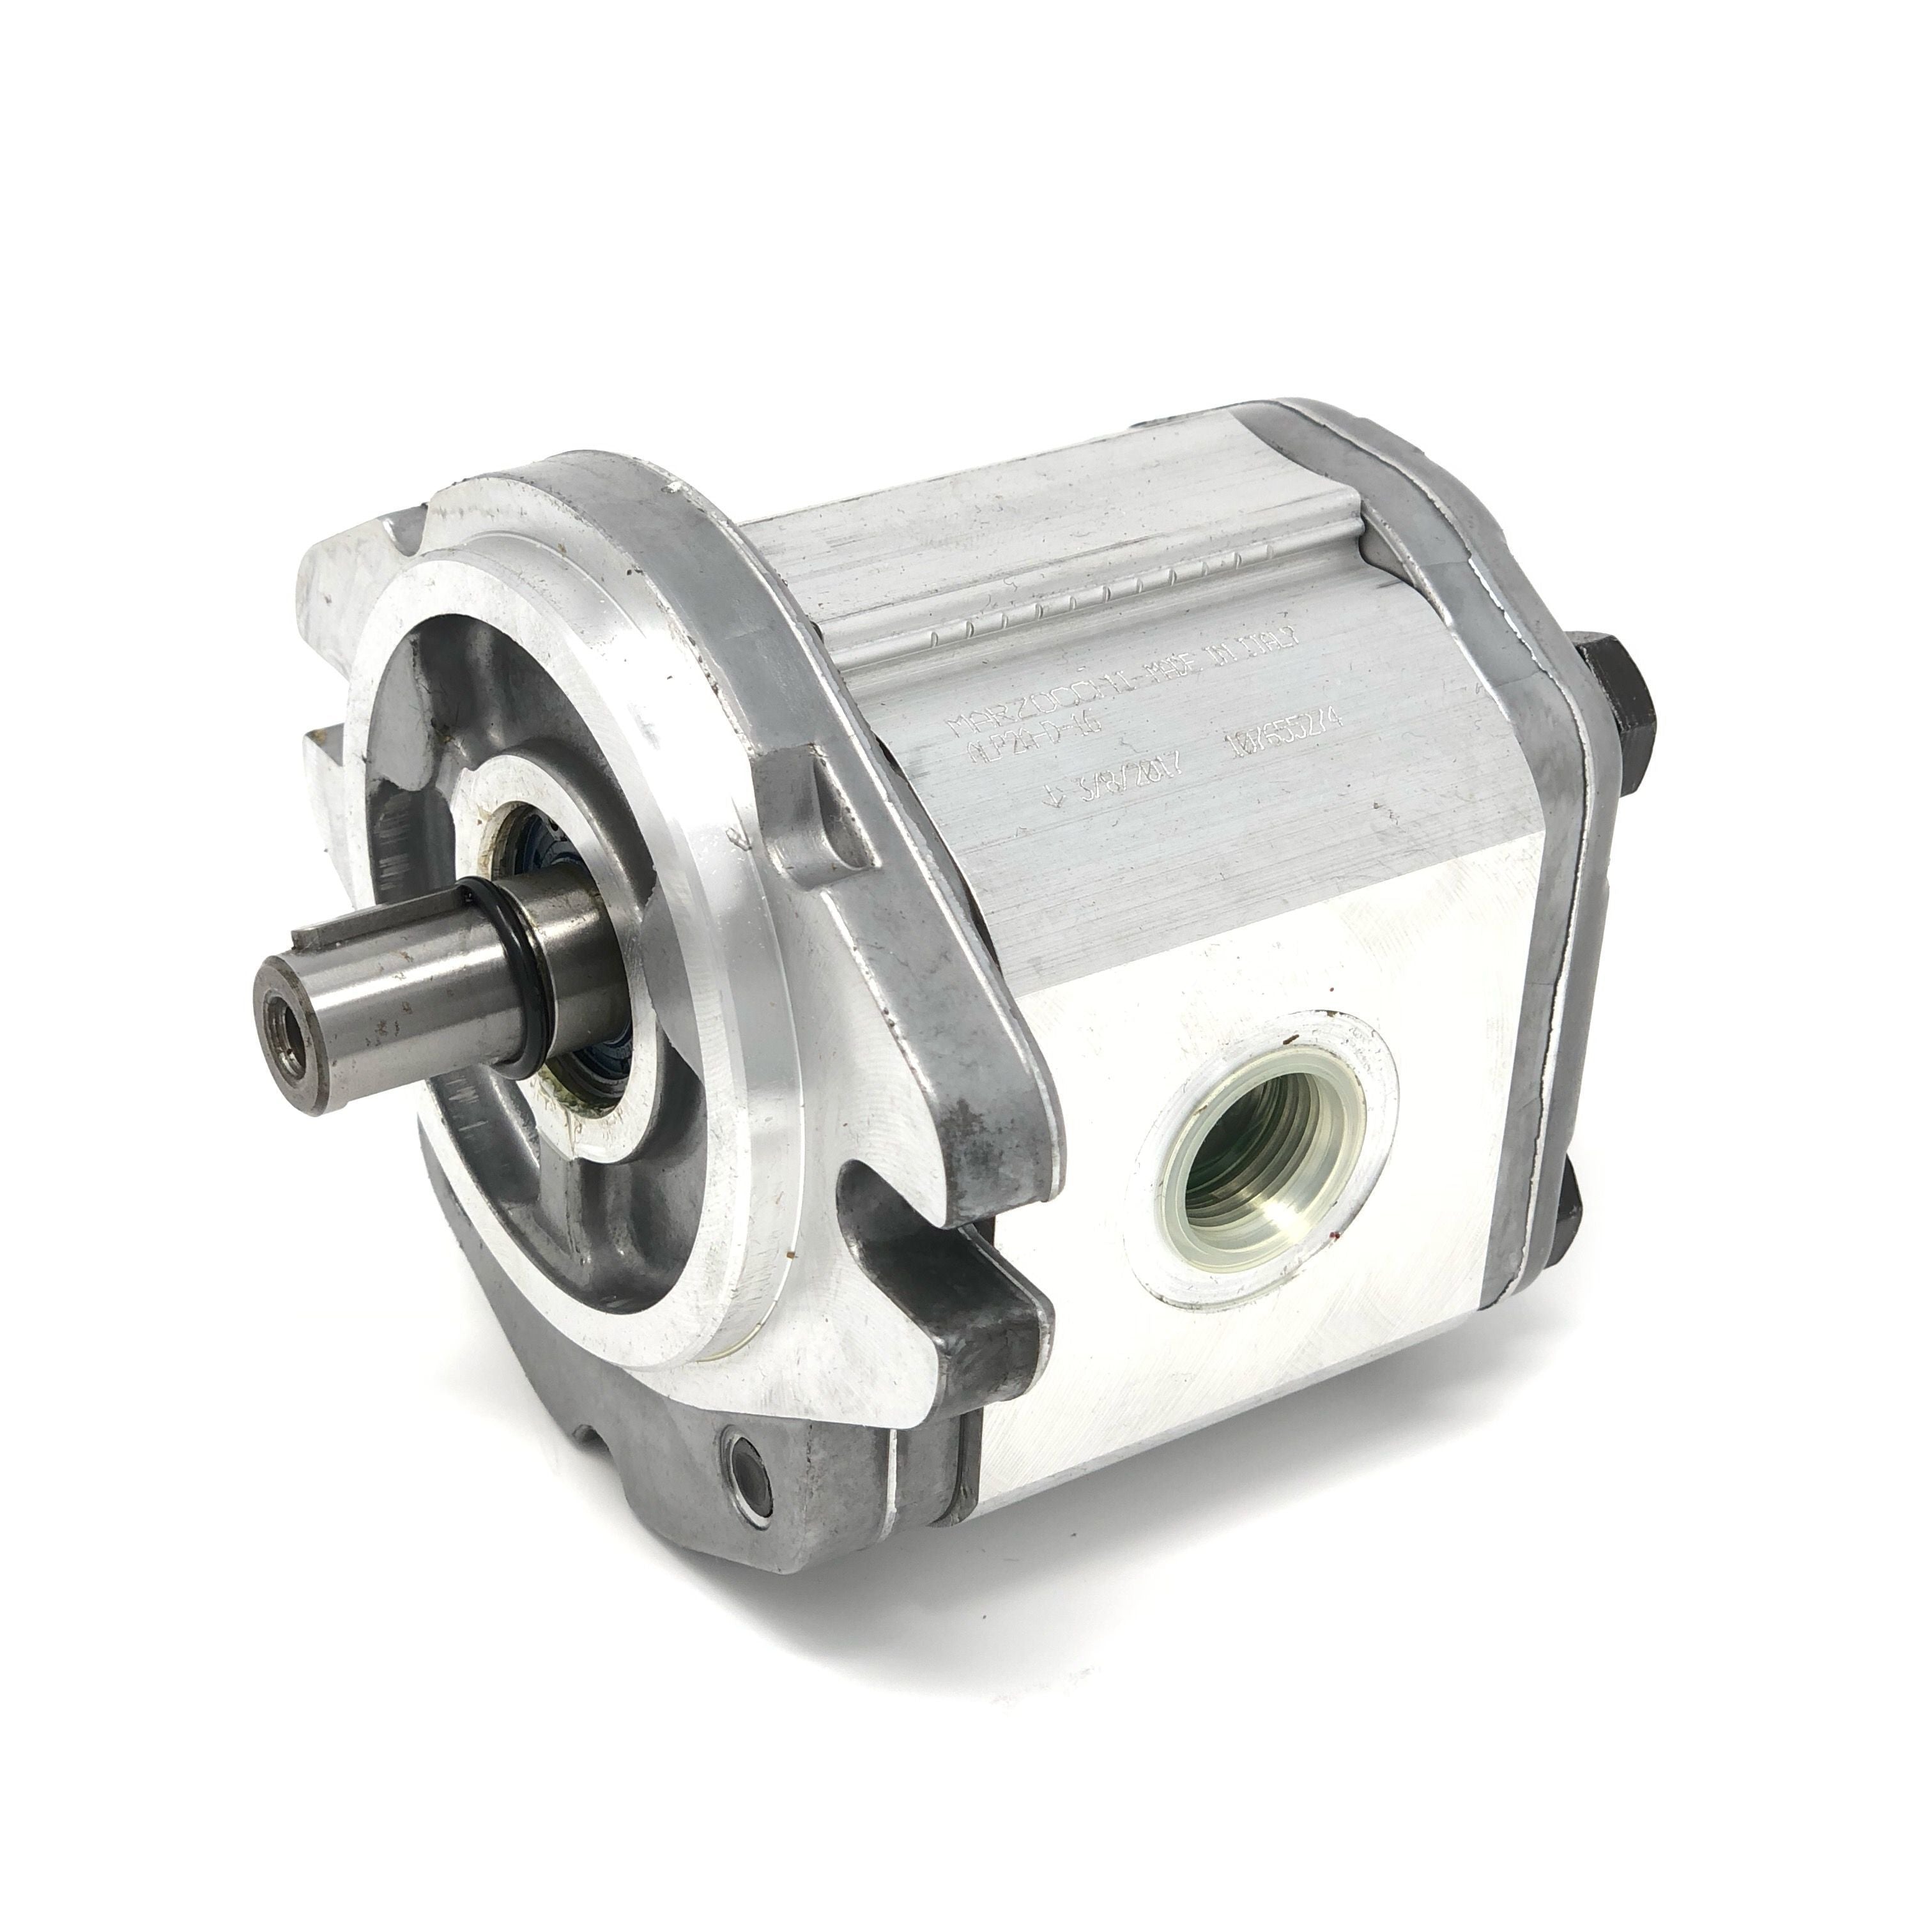 ALP1A-D-13 : Marzocchi Gear Pump, CW, 9.3cc (0.5673in3), 4.42 GPM, 2610psi, 3000 RPM, #10 SAE (5/8") In, #8 SAE (1/2") Out, Keyed Shaft 1/2" Bore x 1/8" Key, SAE AA 2-Bolt Mount